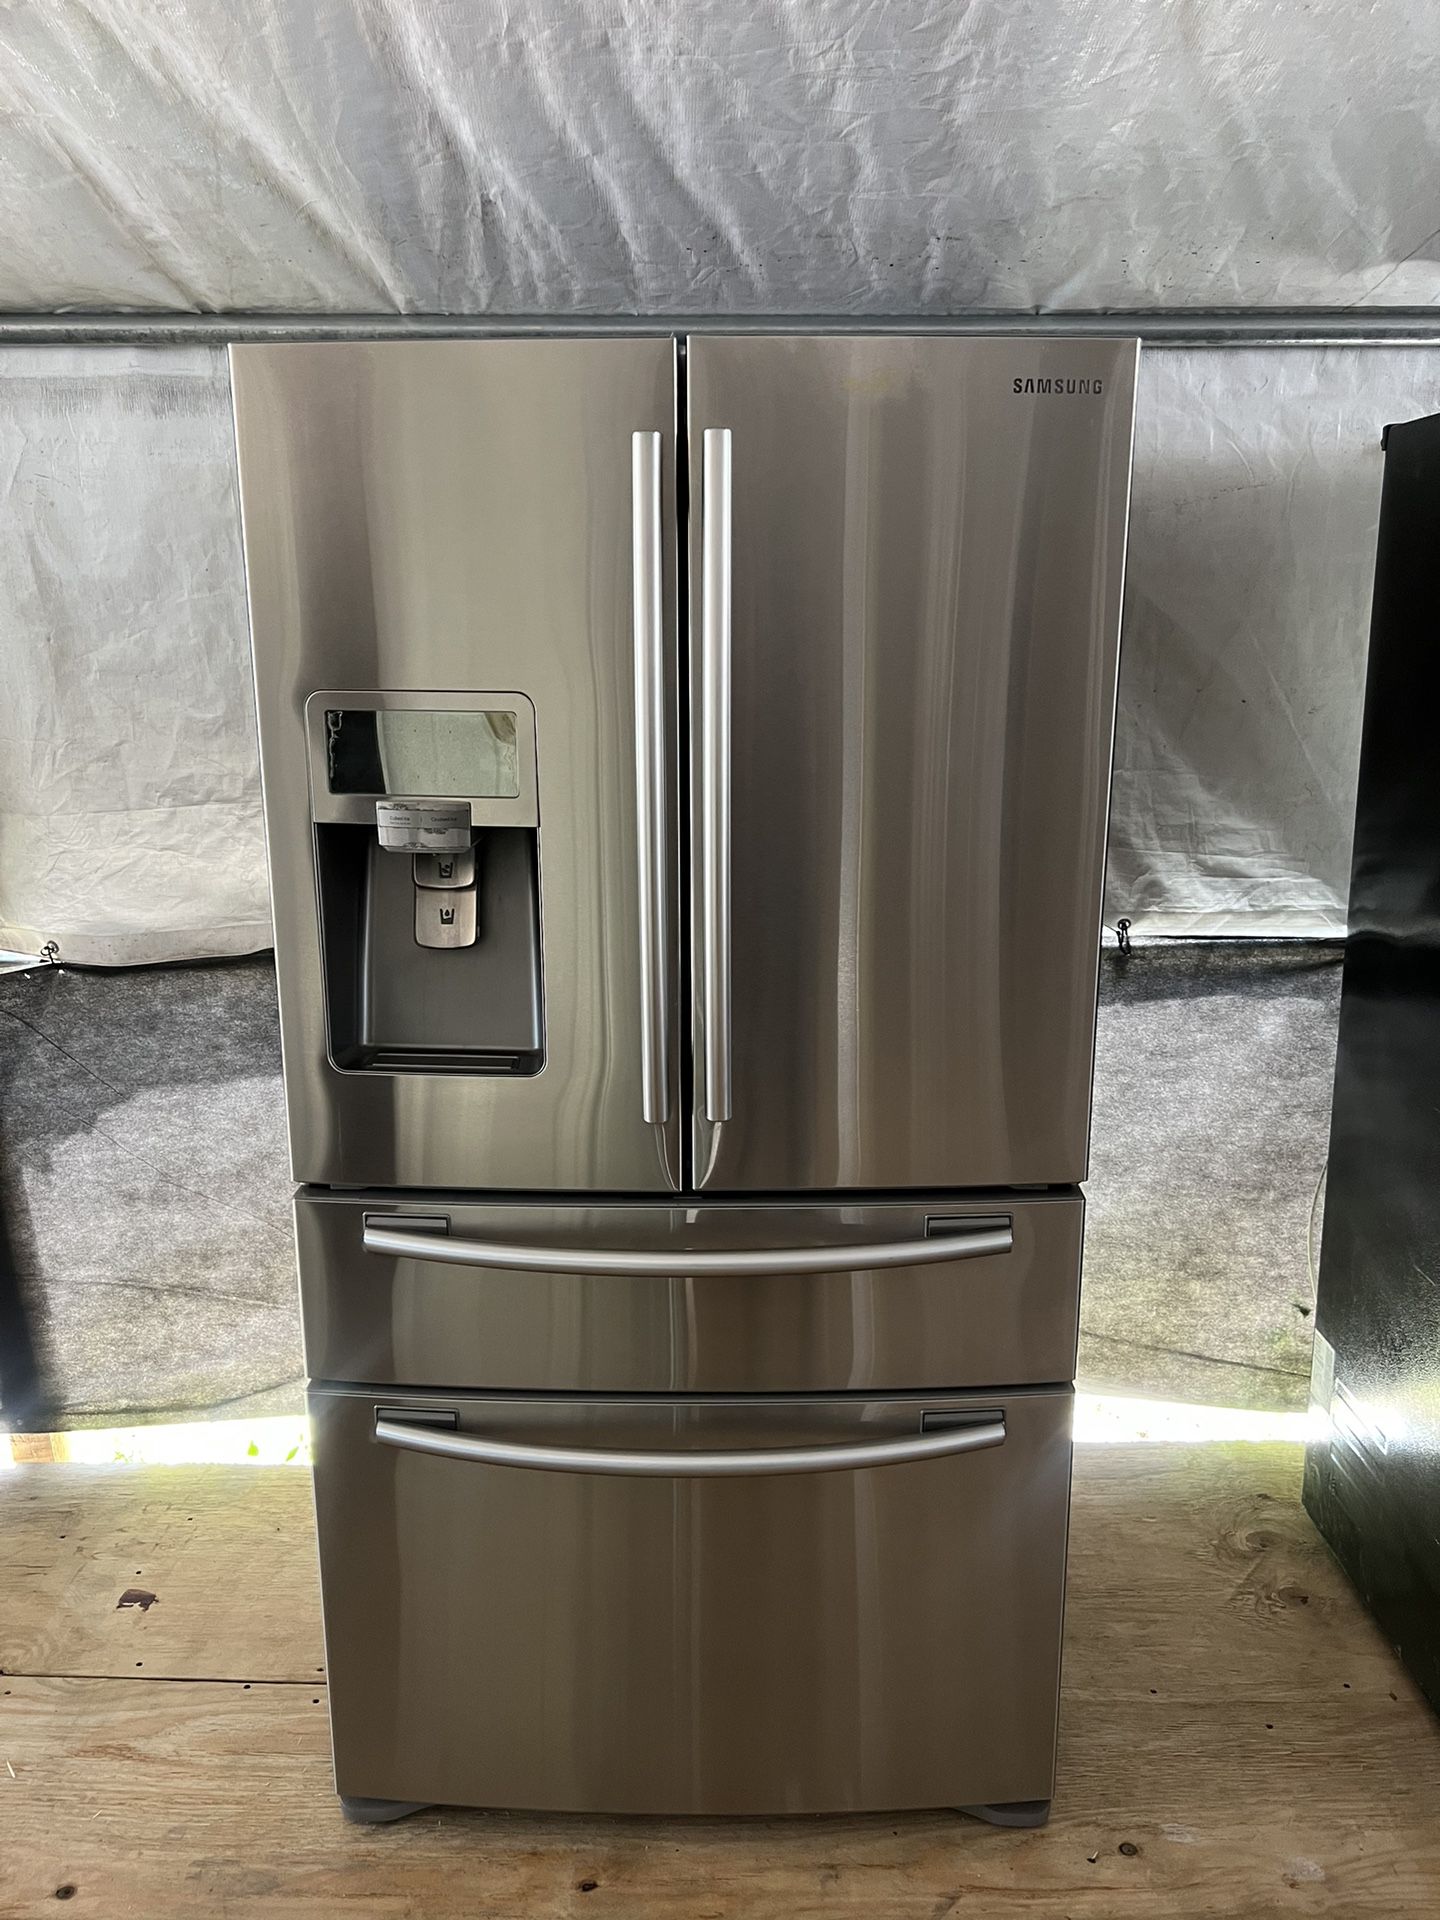 Samsung 4 Door Refrigerator Stainless Steel   60 day warranty/ Located at:📍5415 Carmack Rd Tampa Fl 33610📍 